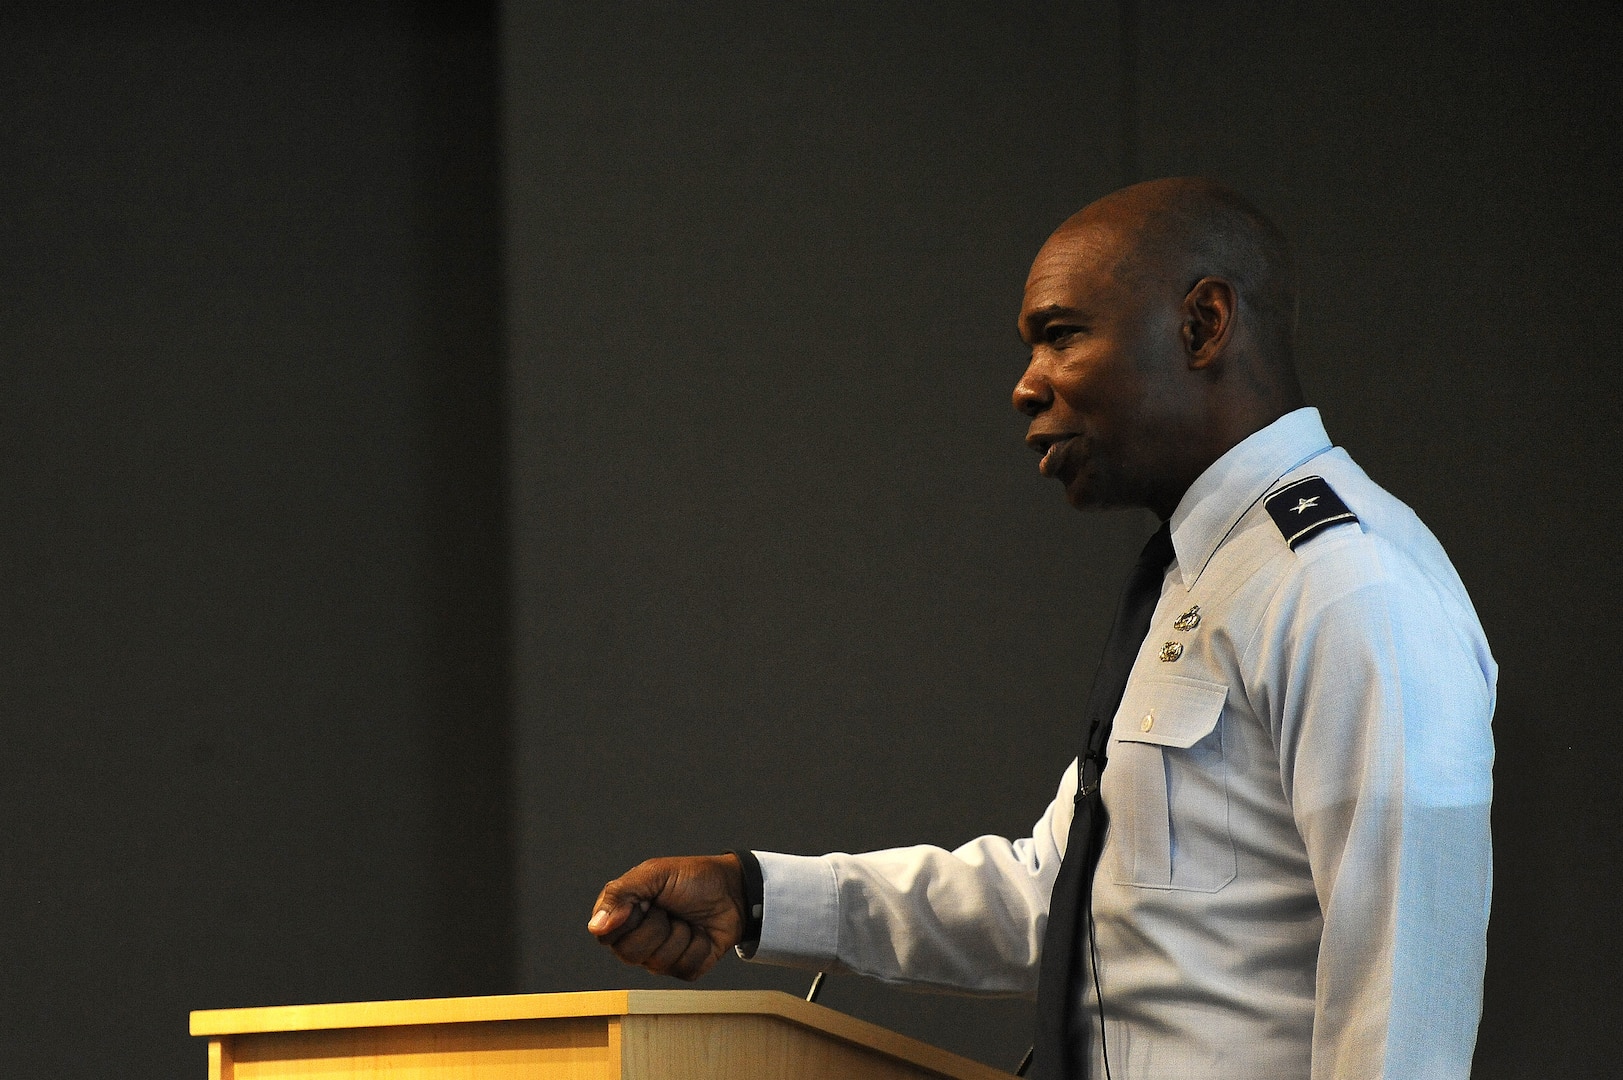 Air Force Brig. Gen. Ondra Berry, the assistant adjutant general for Air with the Nevada National Guard, speaks to those in attendance at a mentorship session at the Air National Guard Readiness Center at Joint Base Andrews, Maryland, during the kickoff event for the Air Guard's Diversity Council Speaker Series, Dec. 5, 2014. During his talk, Berry touched on components that make good leaders, stressing how personal growth, passion and coaching others are all tied together in making an organization successful.